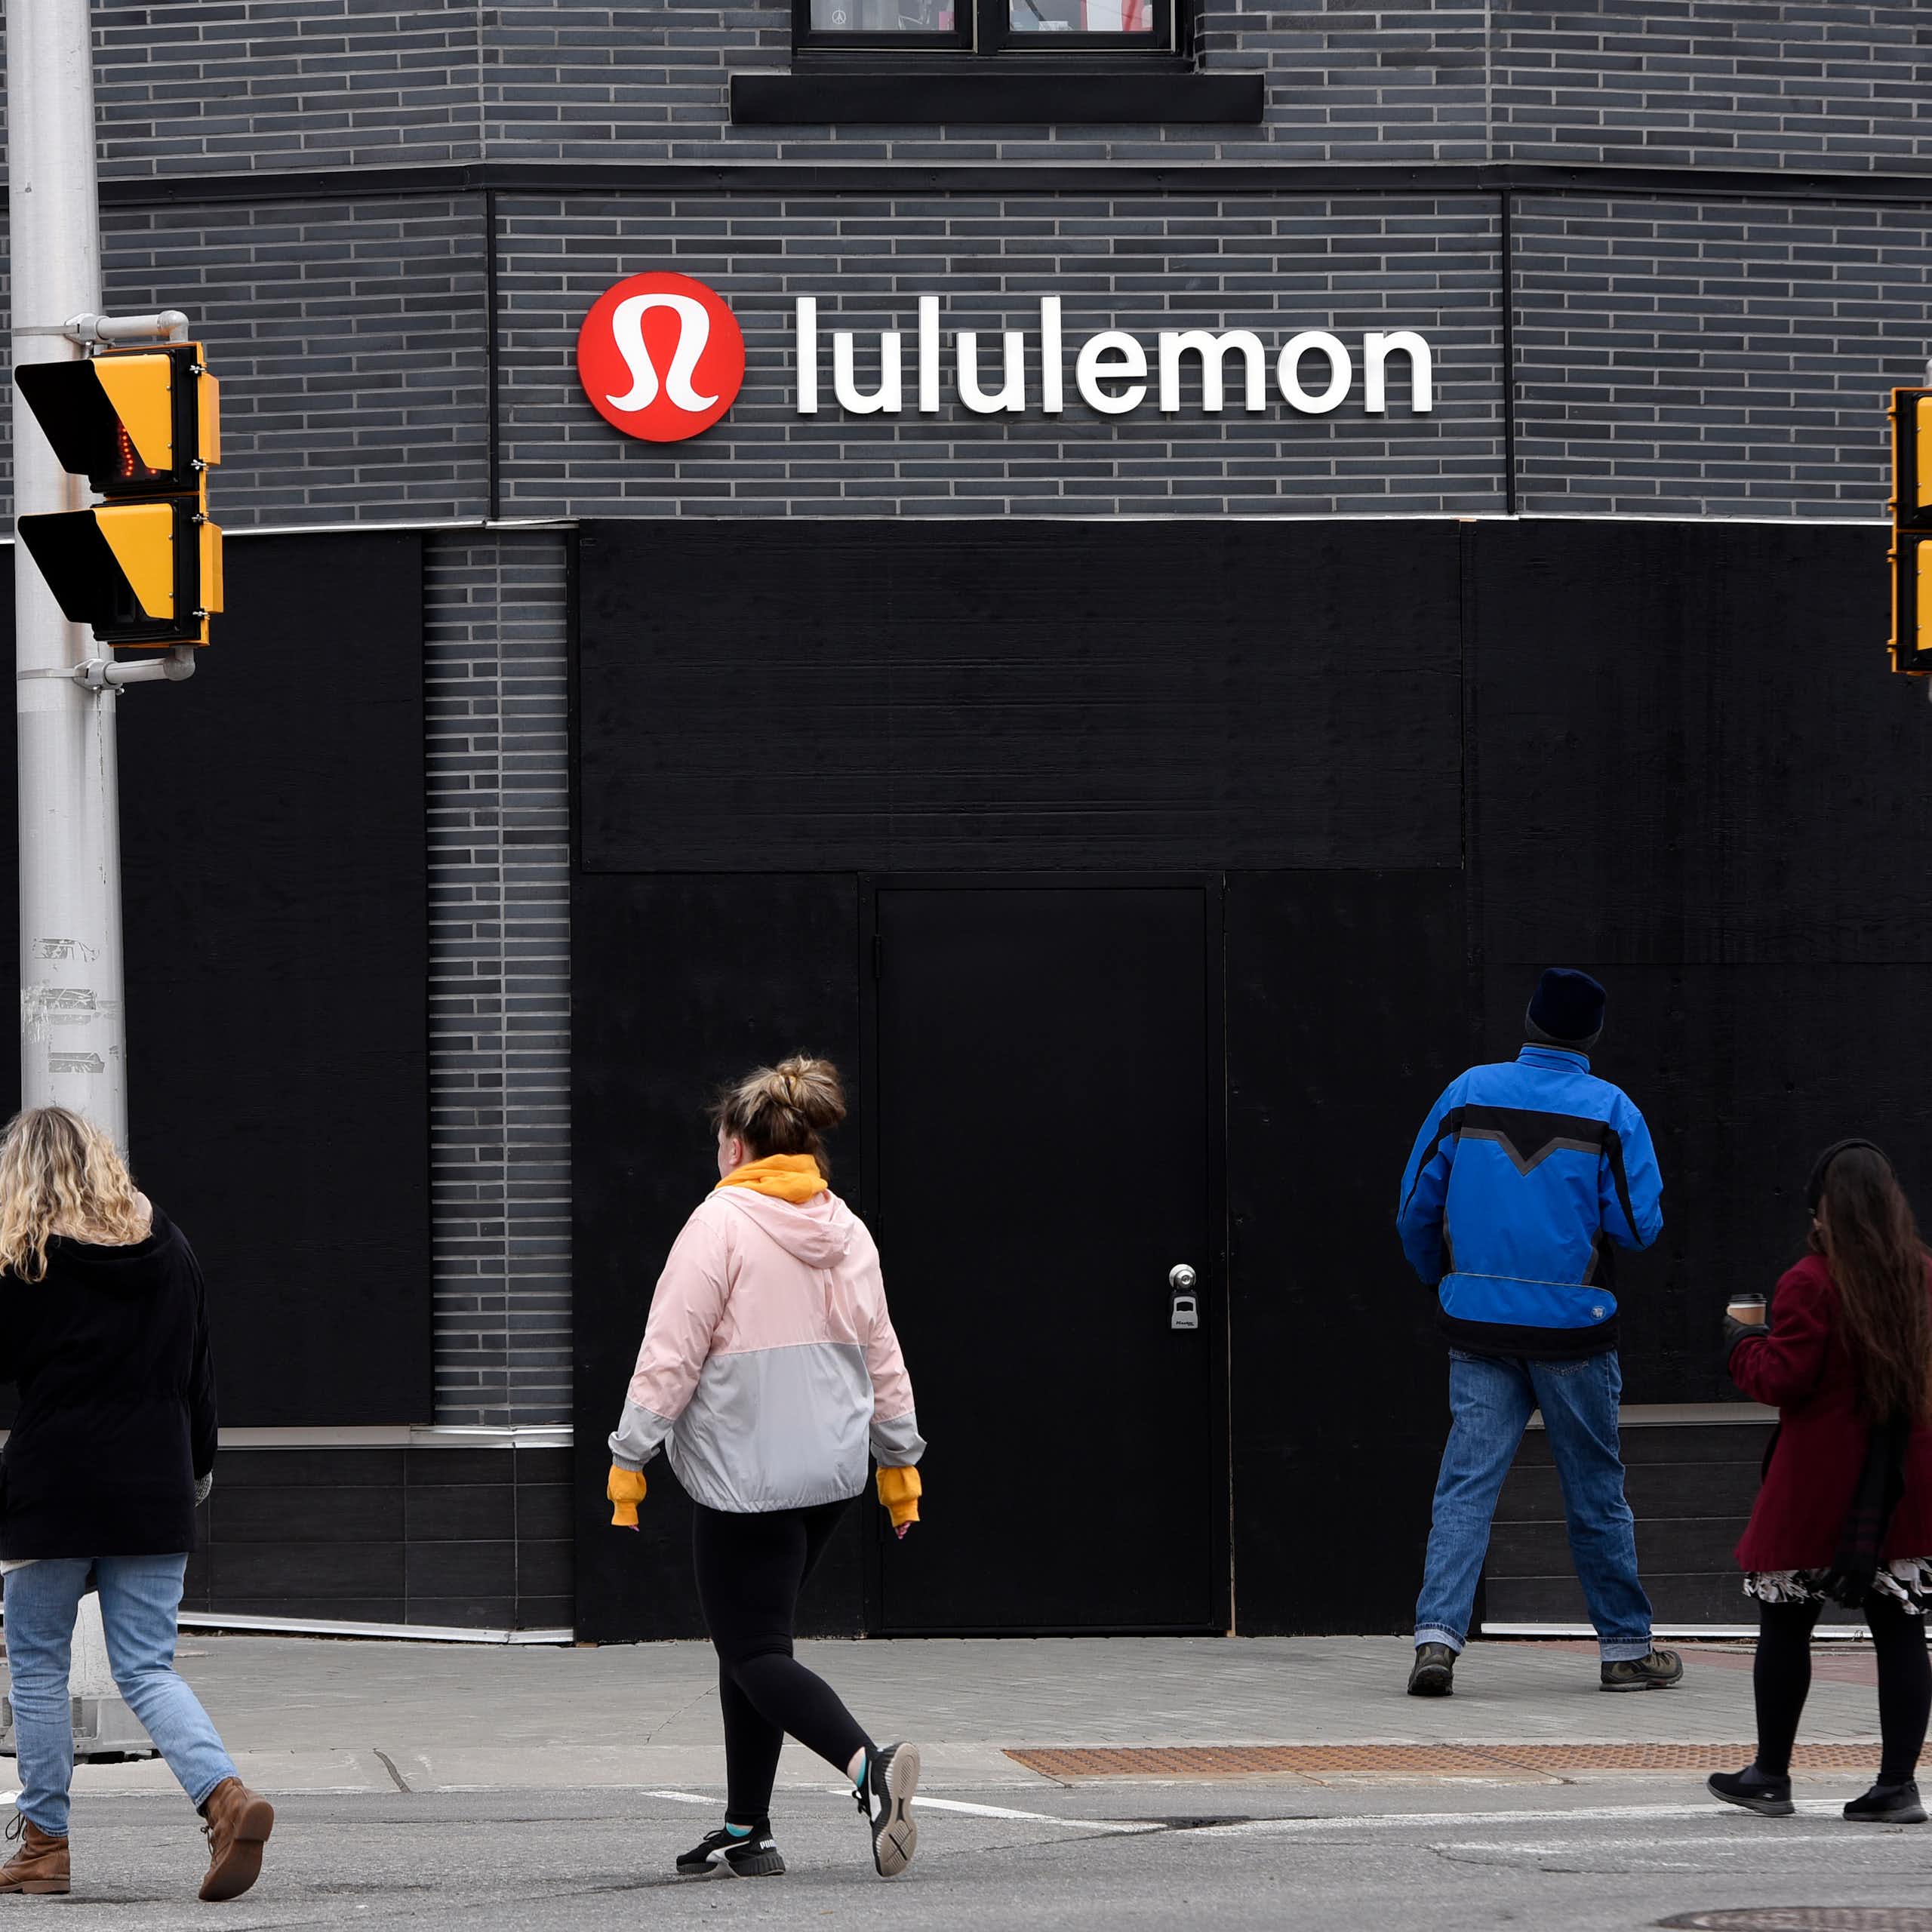 People cross the street in front of a Lululemon store.